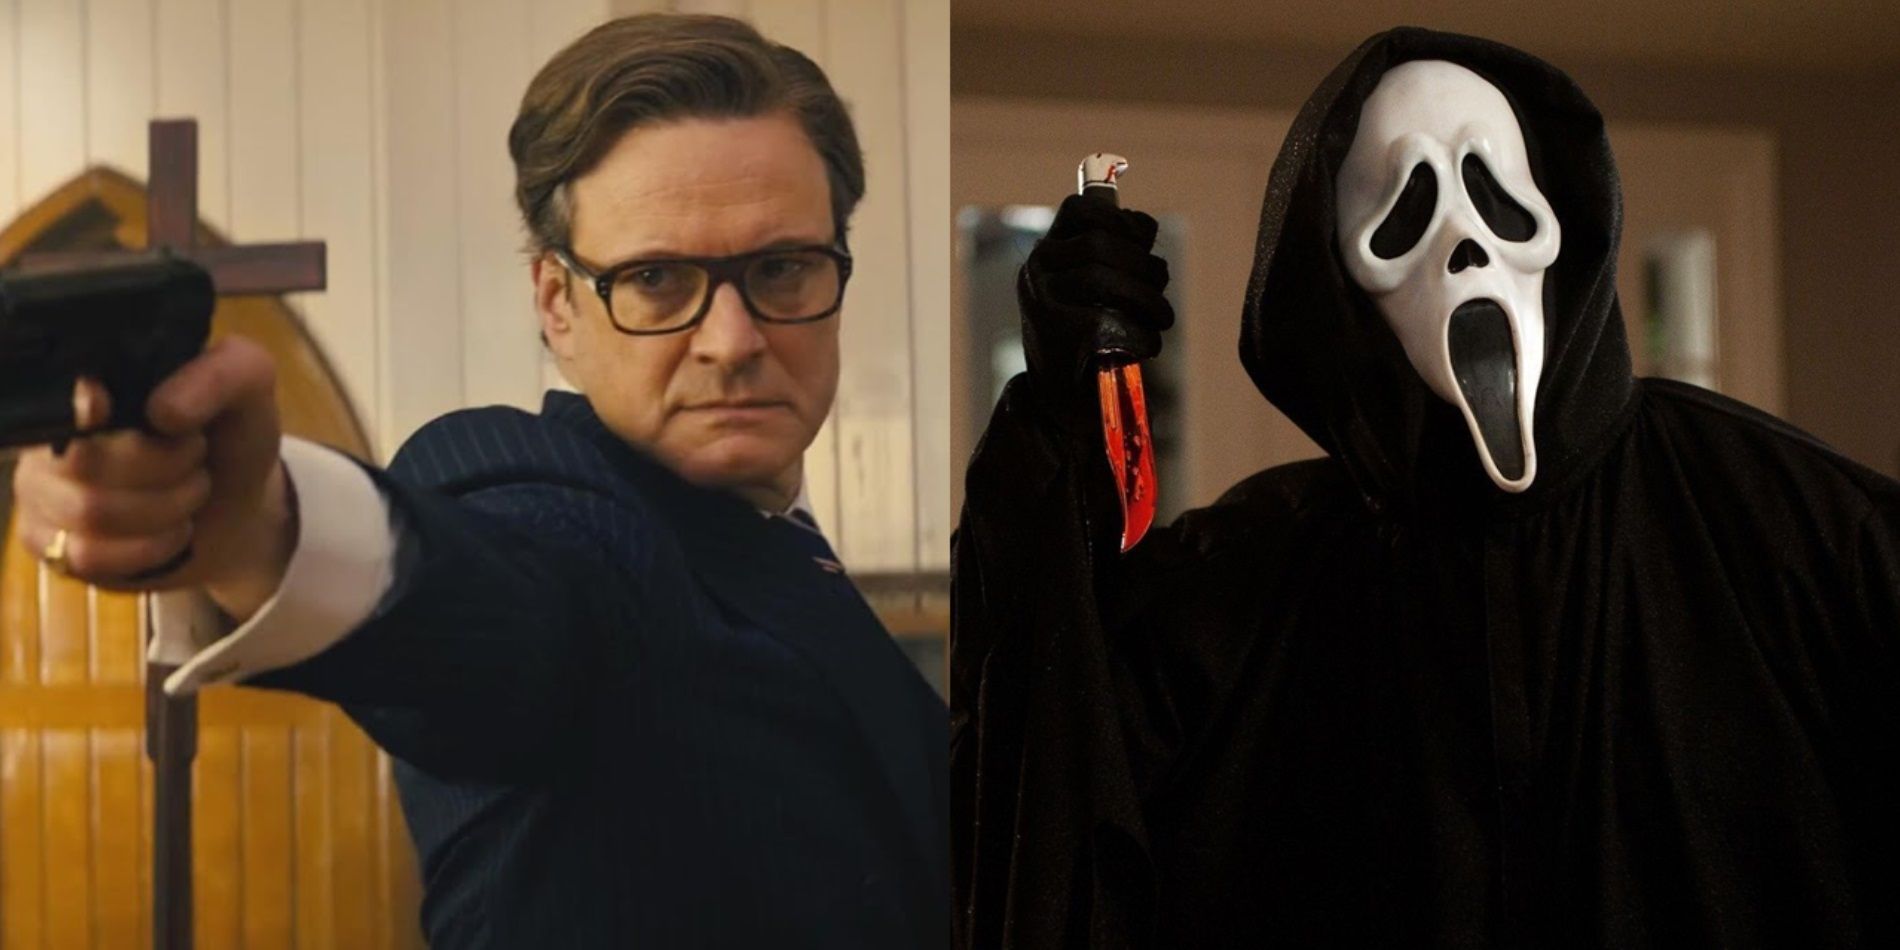 Split image of Colin Firth in Kingsman and the Ghostface killer in Scream